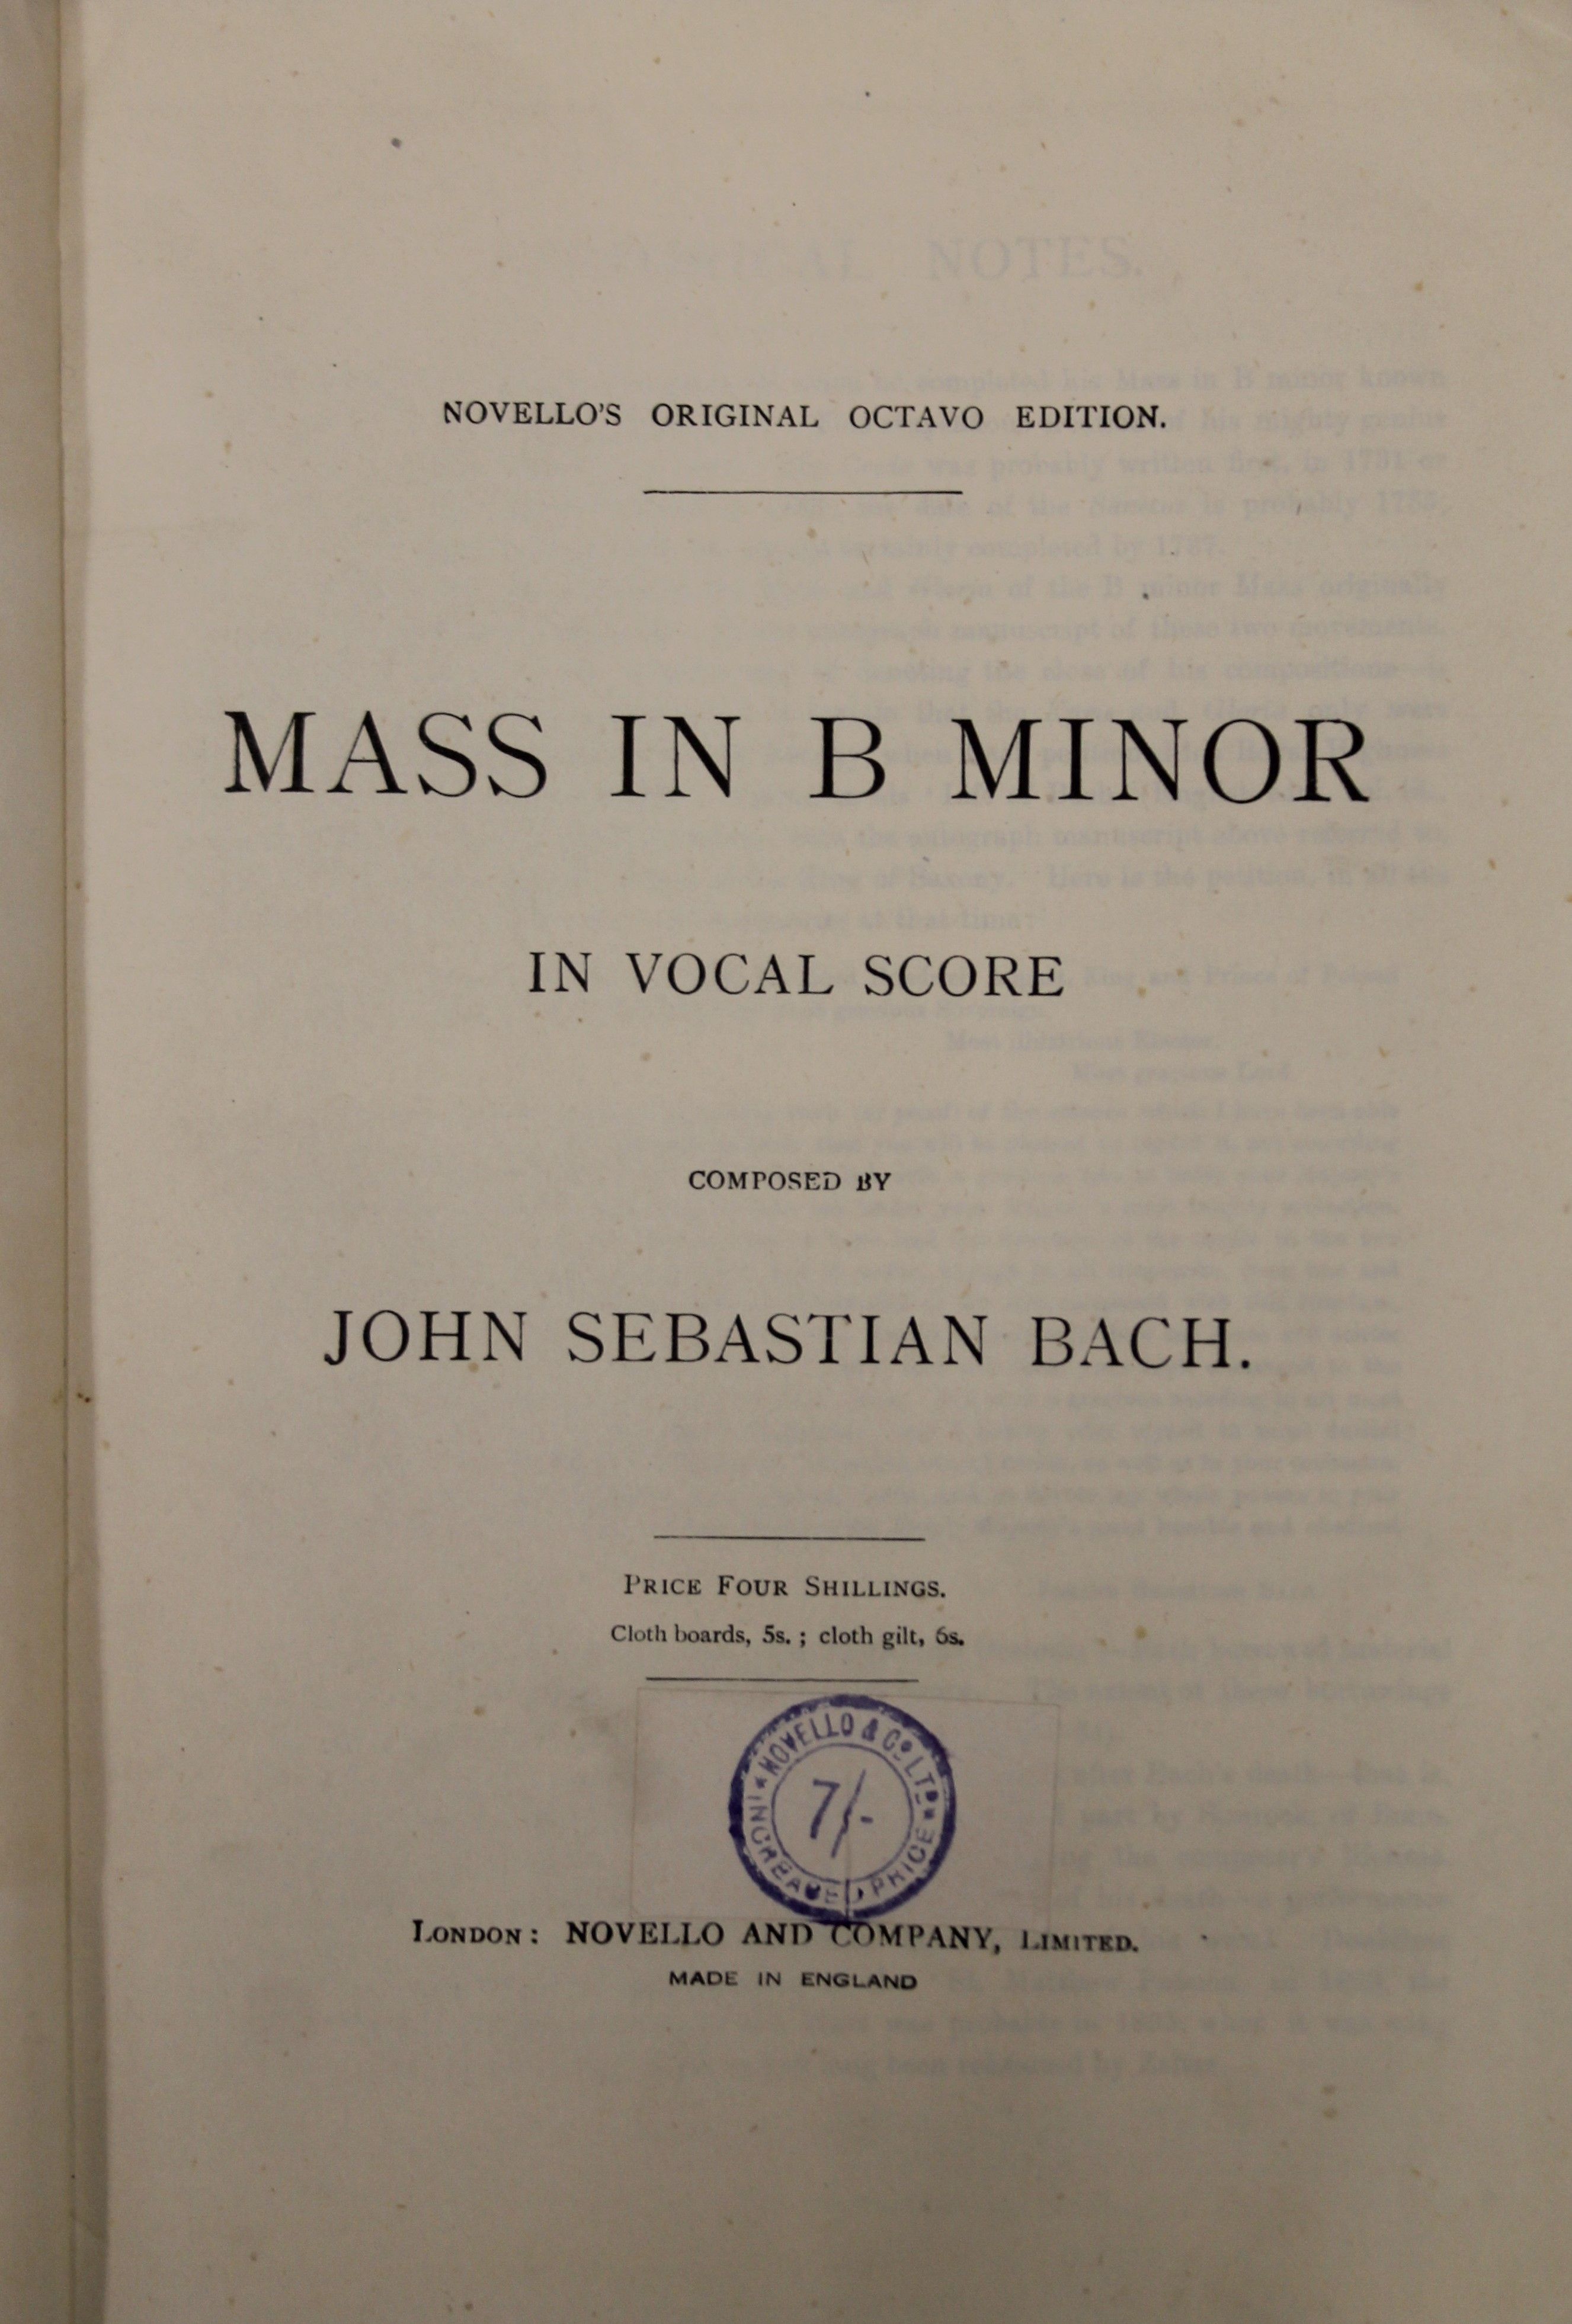 A 1938 hardback score of JS Bach St Mathew Passion edited by Sir Edward Elgar with gilt edged pages, - Image 8 of 9